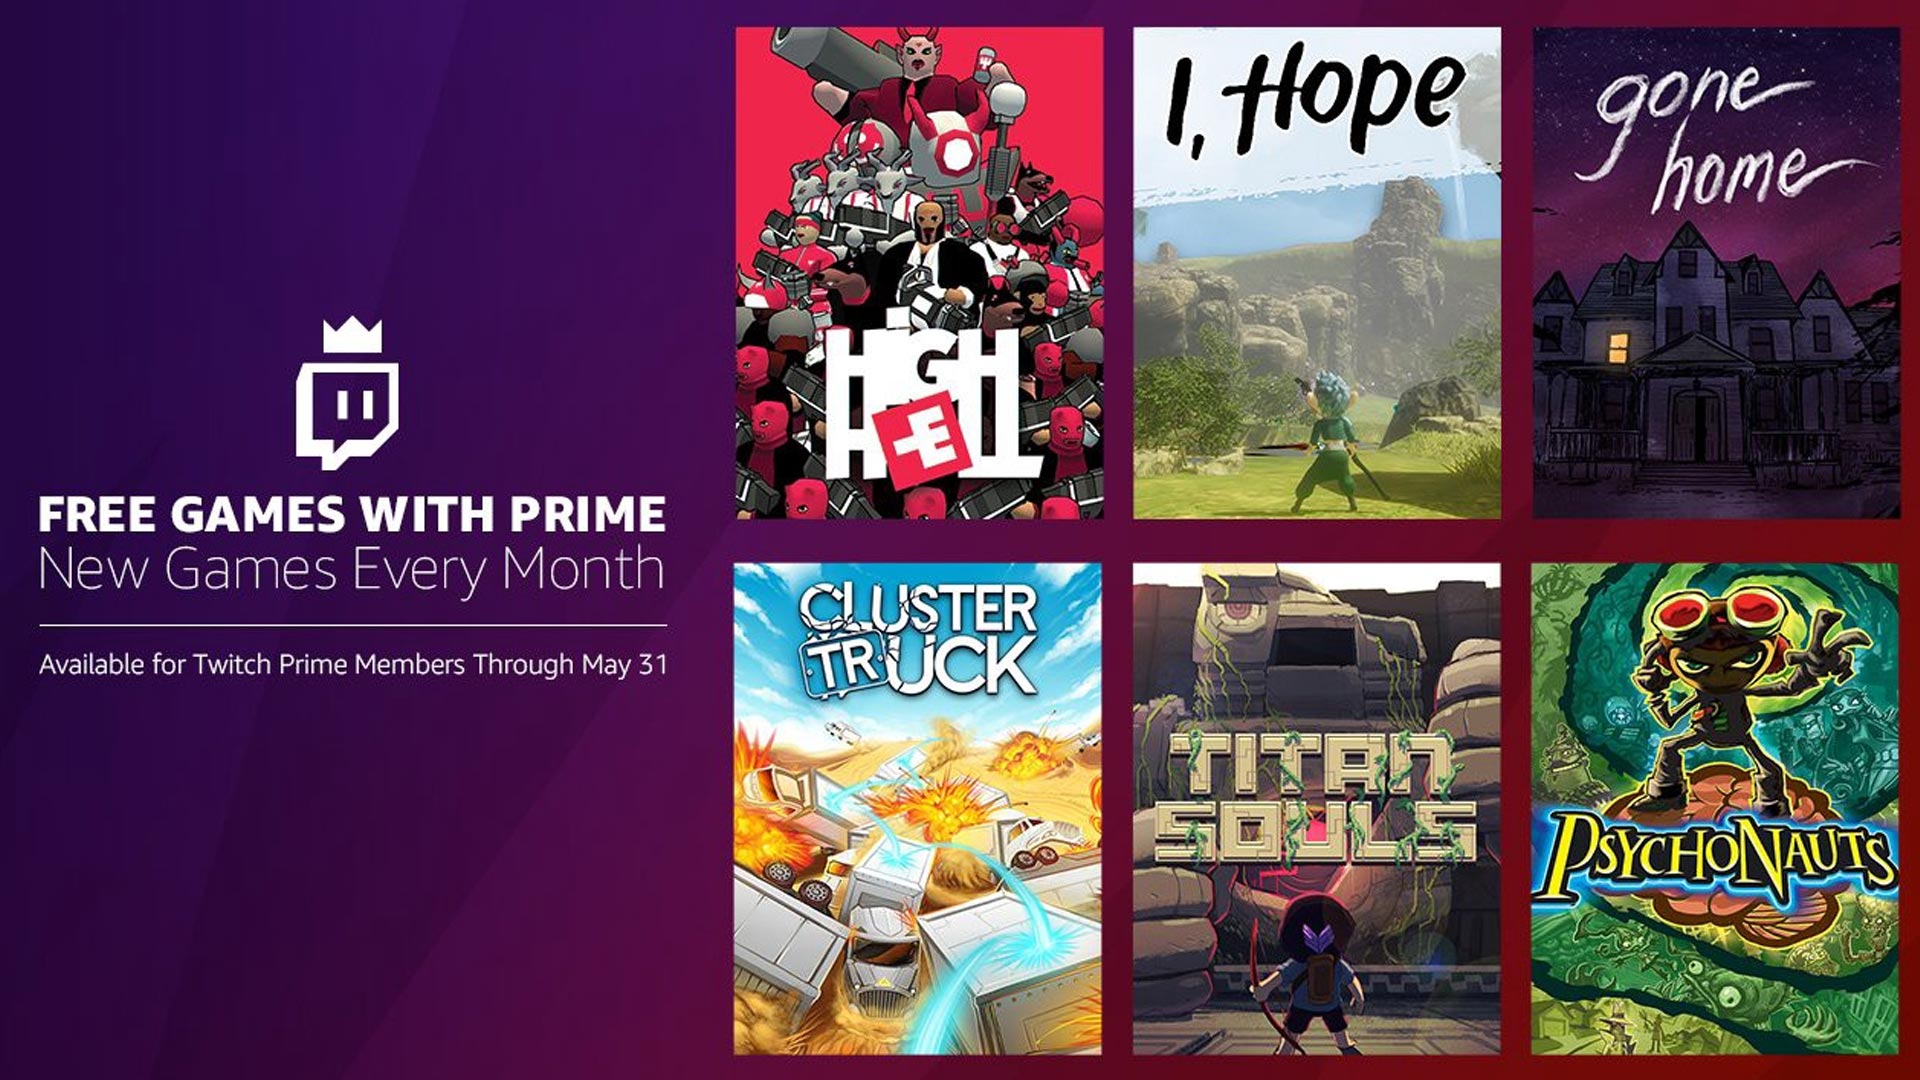 Every game of year. Прайм геймс. Twitch Prime Gaming. Прайм подписка Твич. Twitch Prime subscriber.